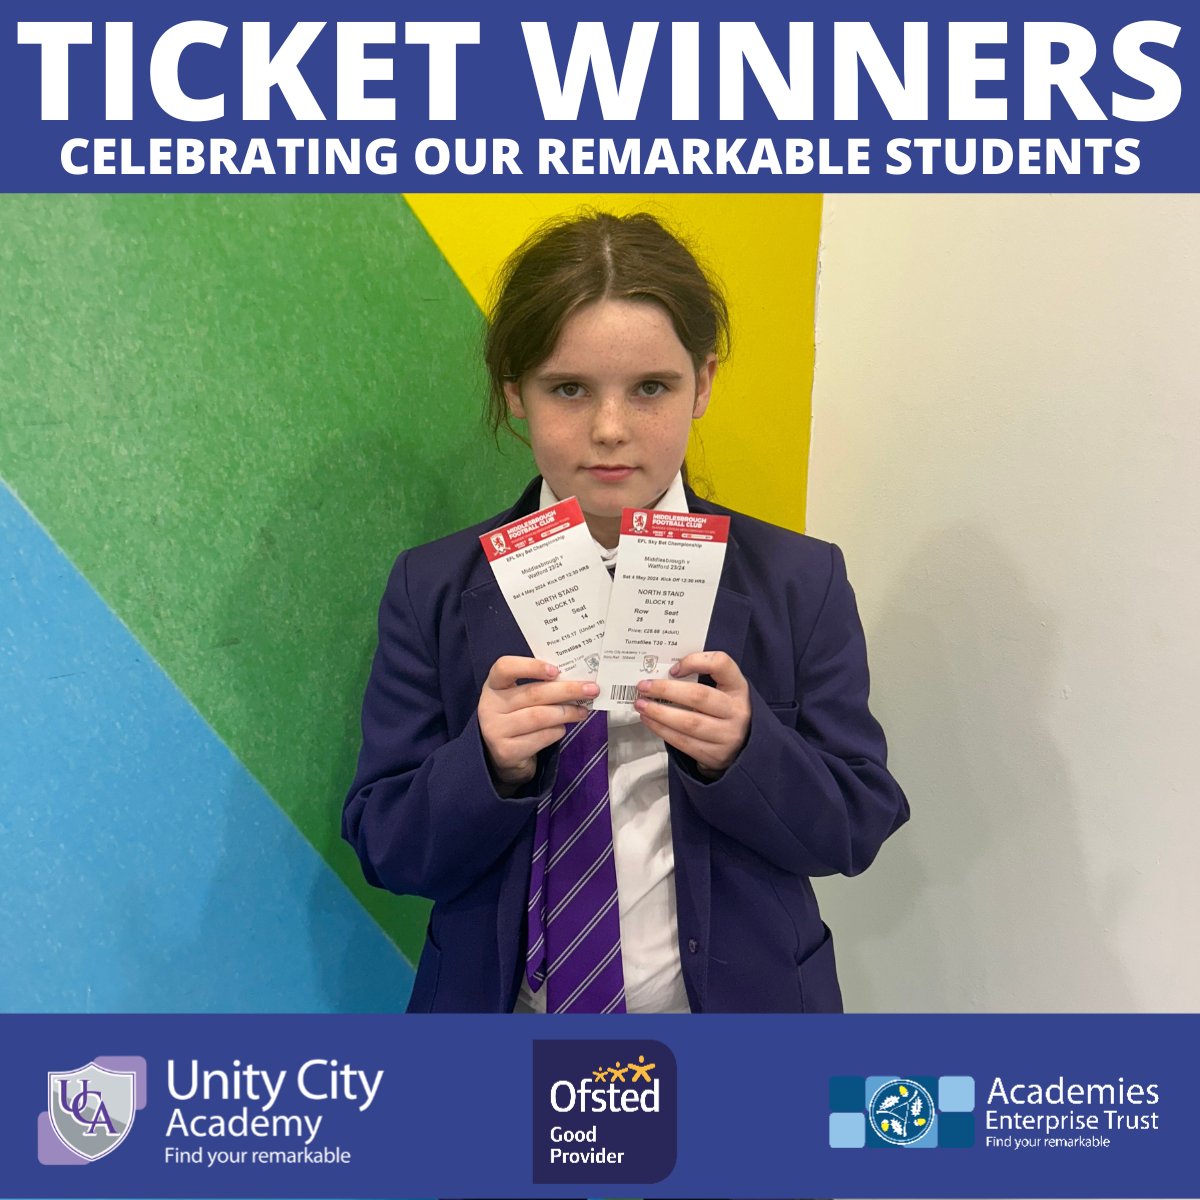 Over the last two weeks we have been holding a raffle for students who attended our praise fest on Fridays - with the winners recieving @boro match tickets.

Our students must have been good luck today as the Boro ran out 3-1 winners!  

Well done!  

#oneaet